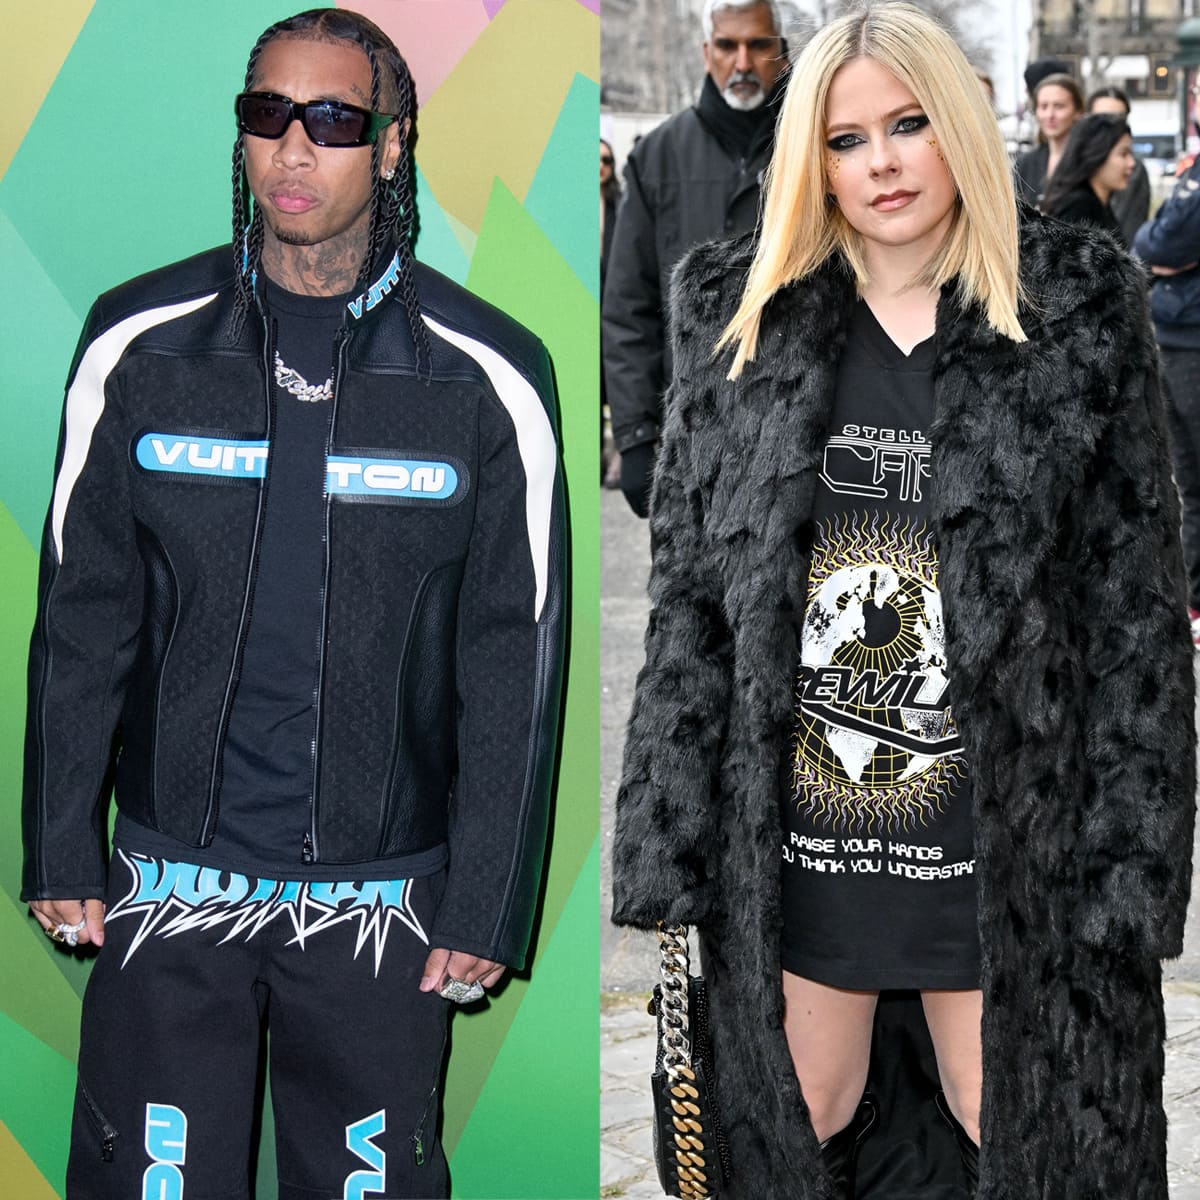 Tyga and Avril Lavigne have reportedly been friends for years before they started dating recently